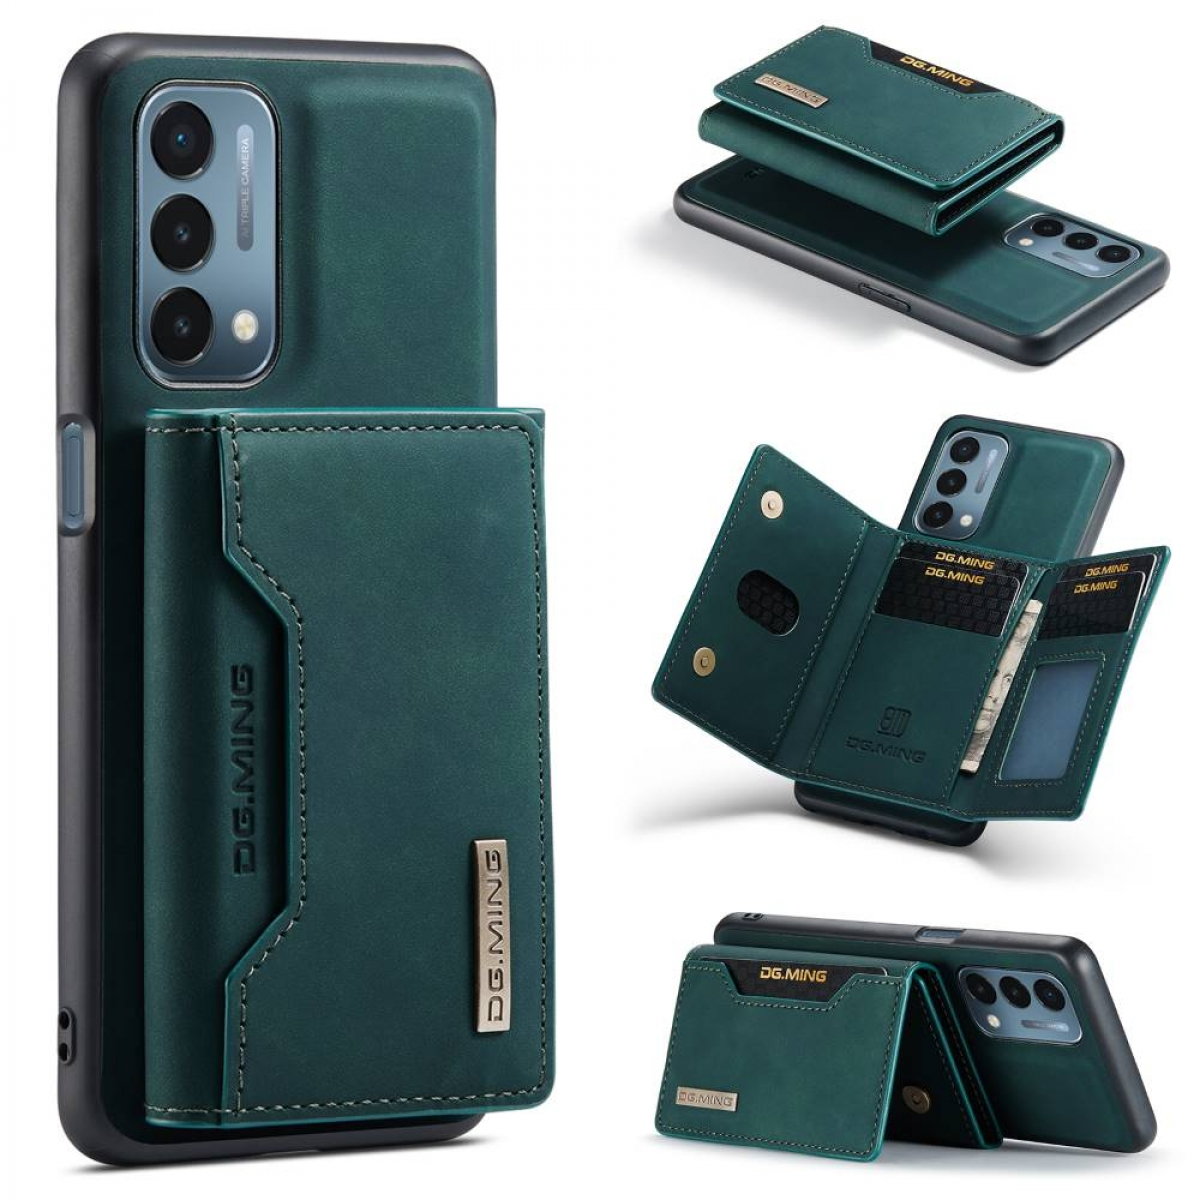 DG MING M2 2in1, OnePlus, Nord Petrol 5G, N200 Backcover